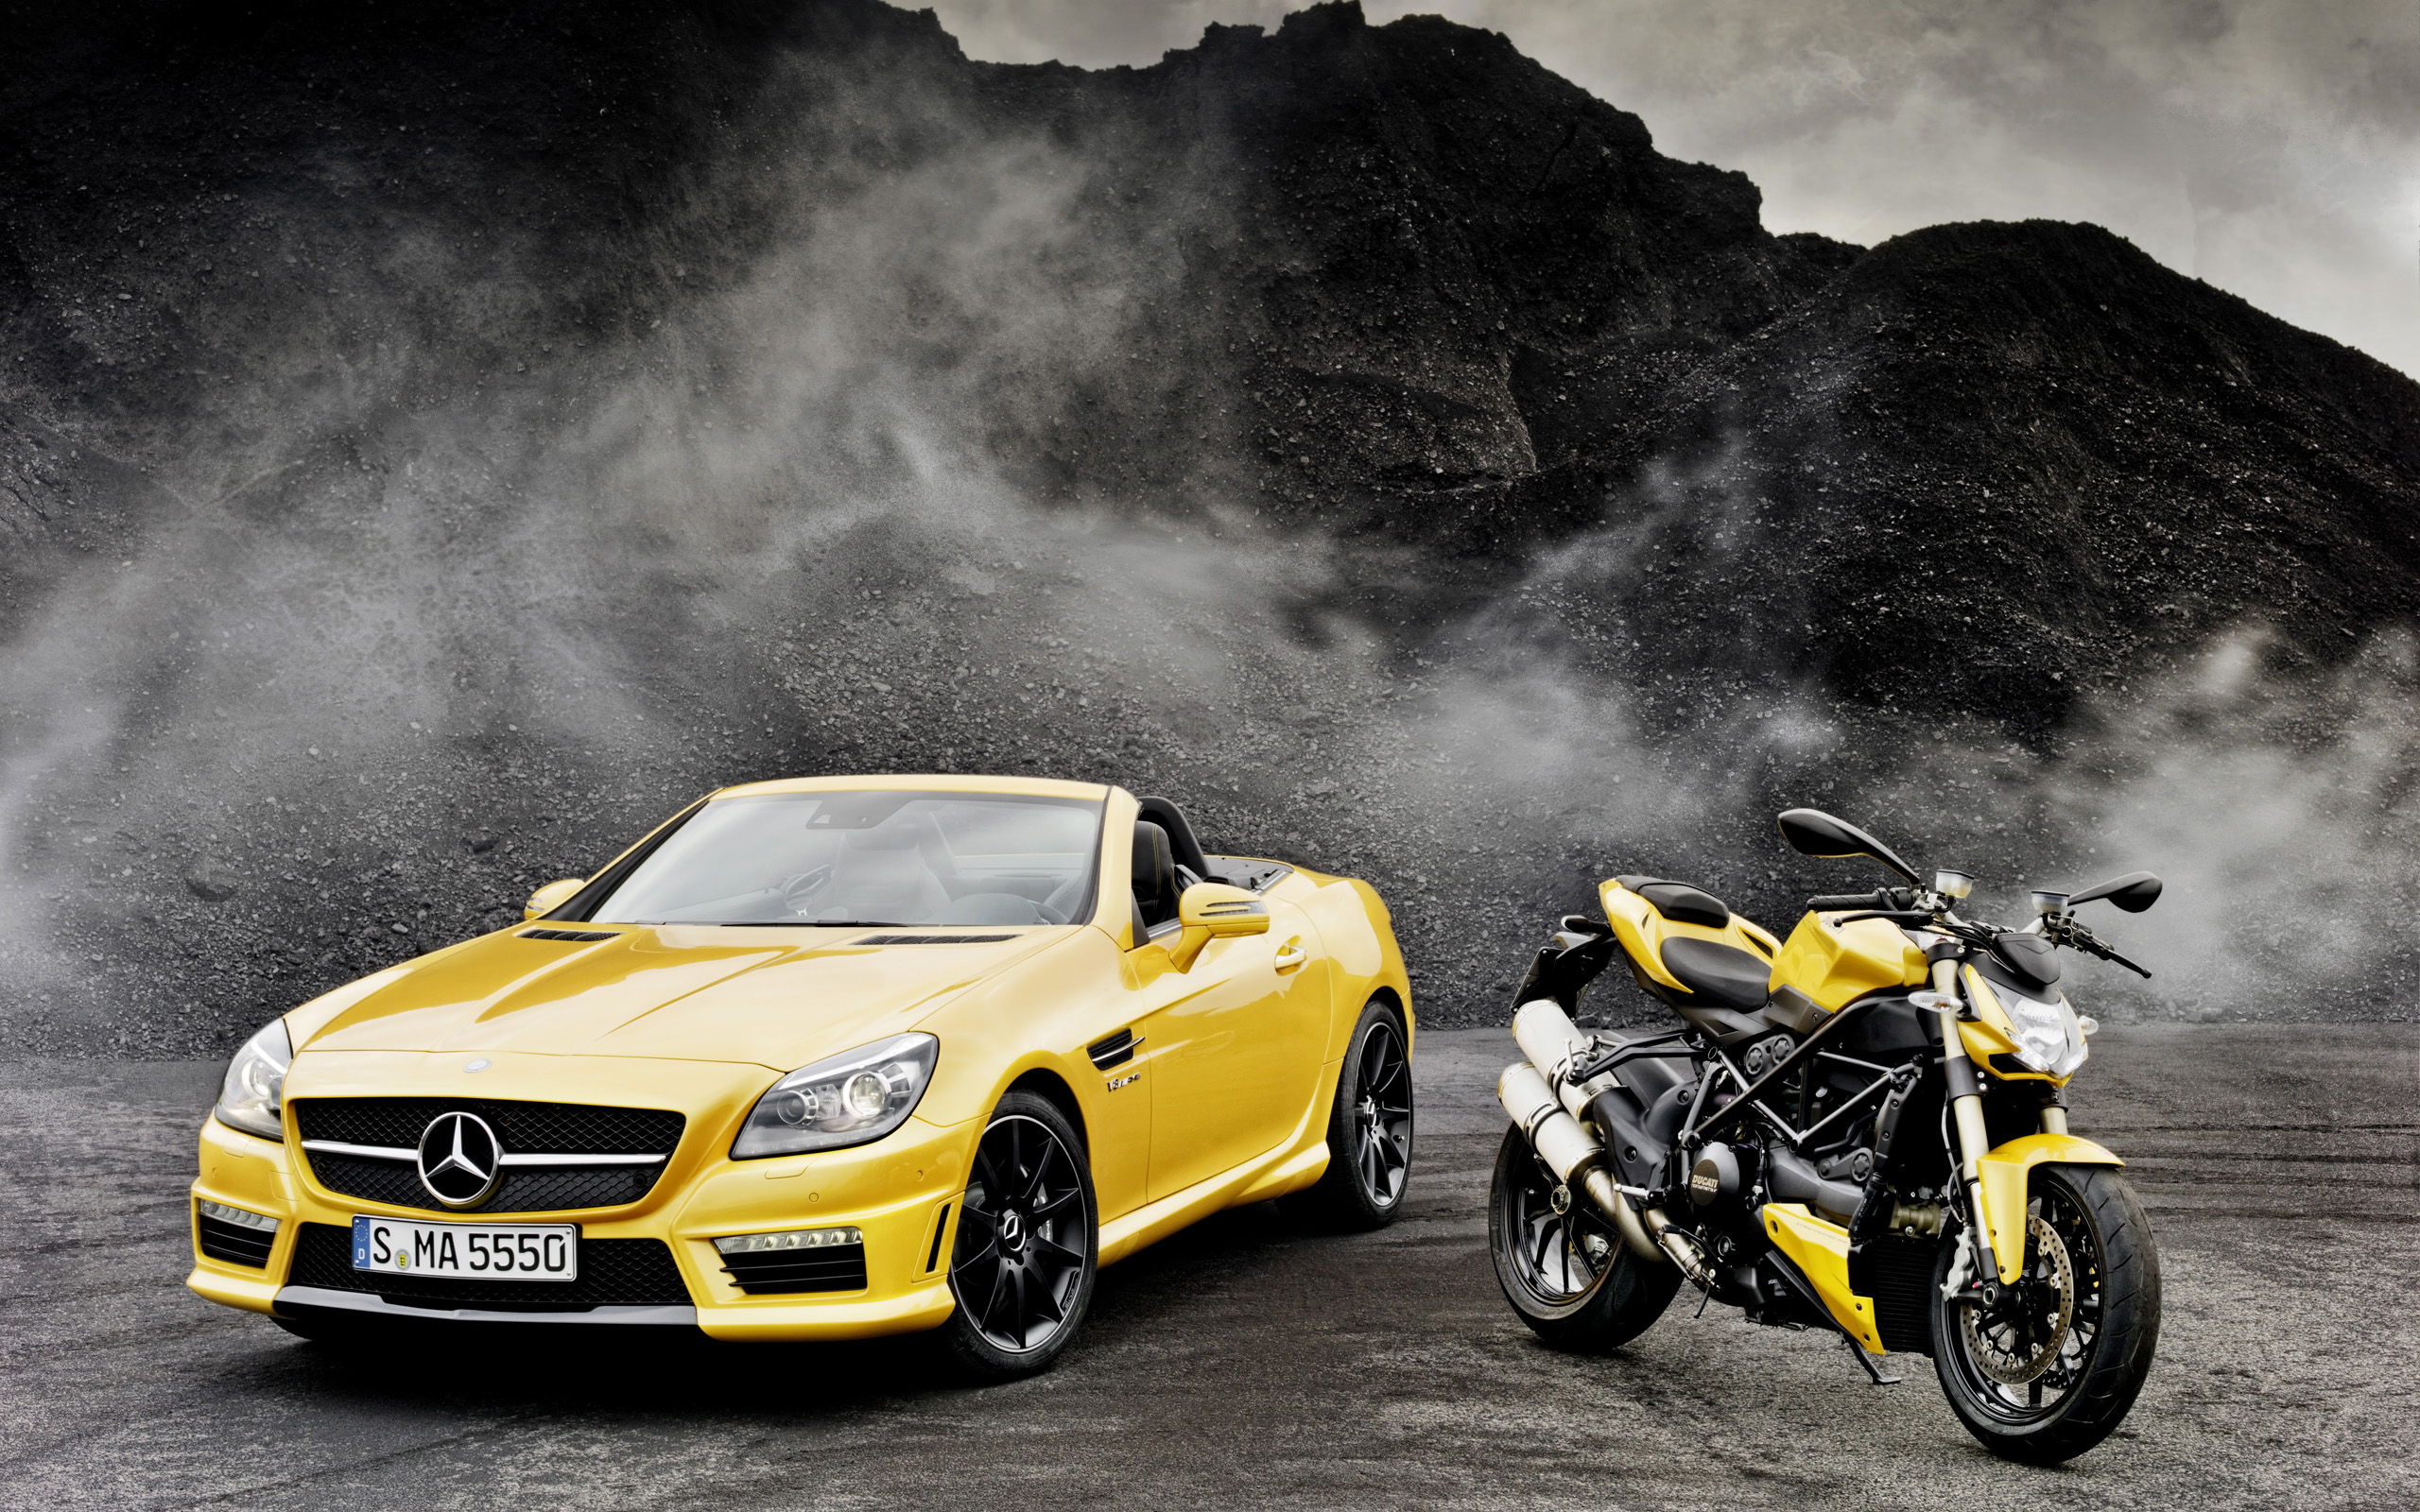 Hd Wallpaper Of Cars And Bikes